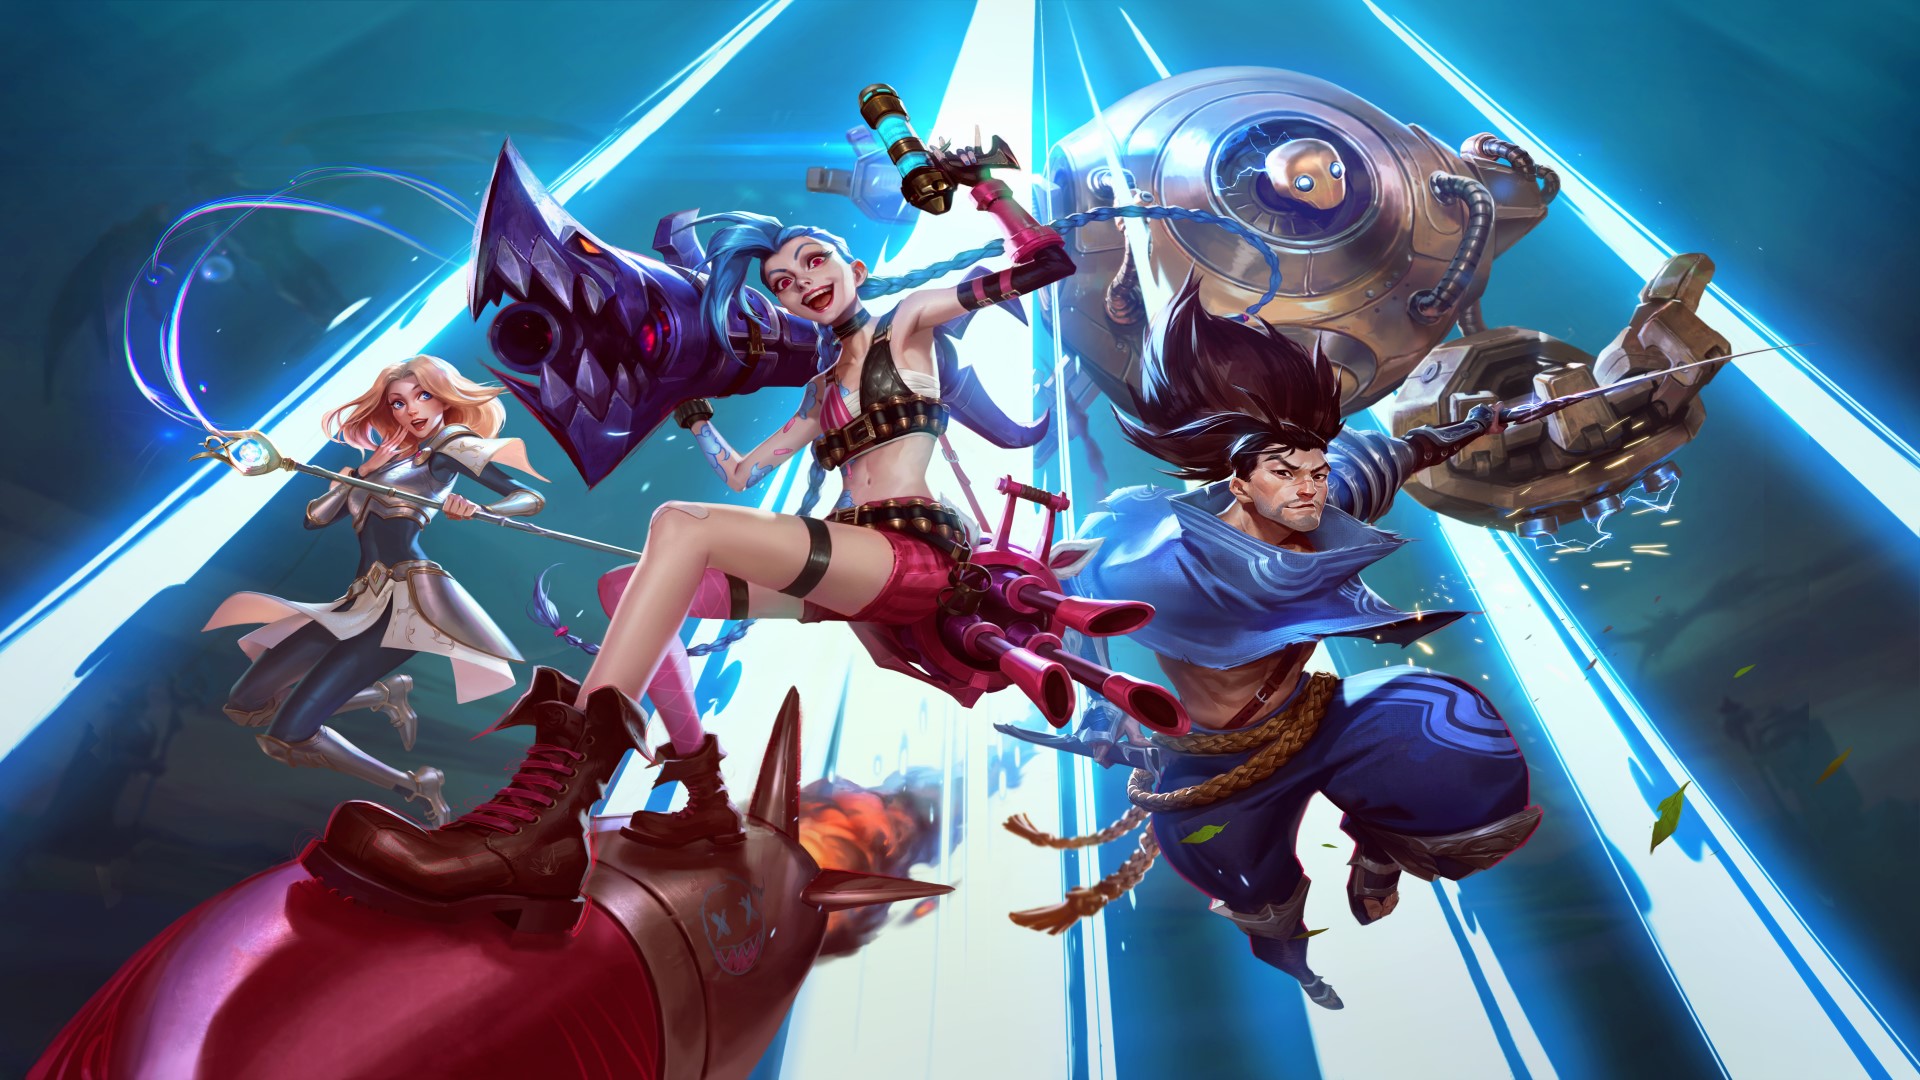 Best mobile multiplayer games: League of Legends: Wild Rift. Image shows a selection of characters from the game, with Jinx very central.